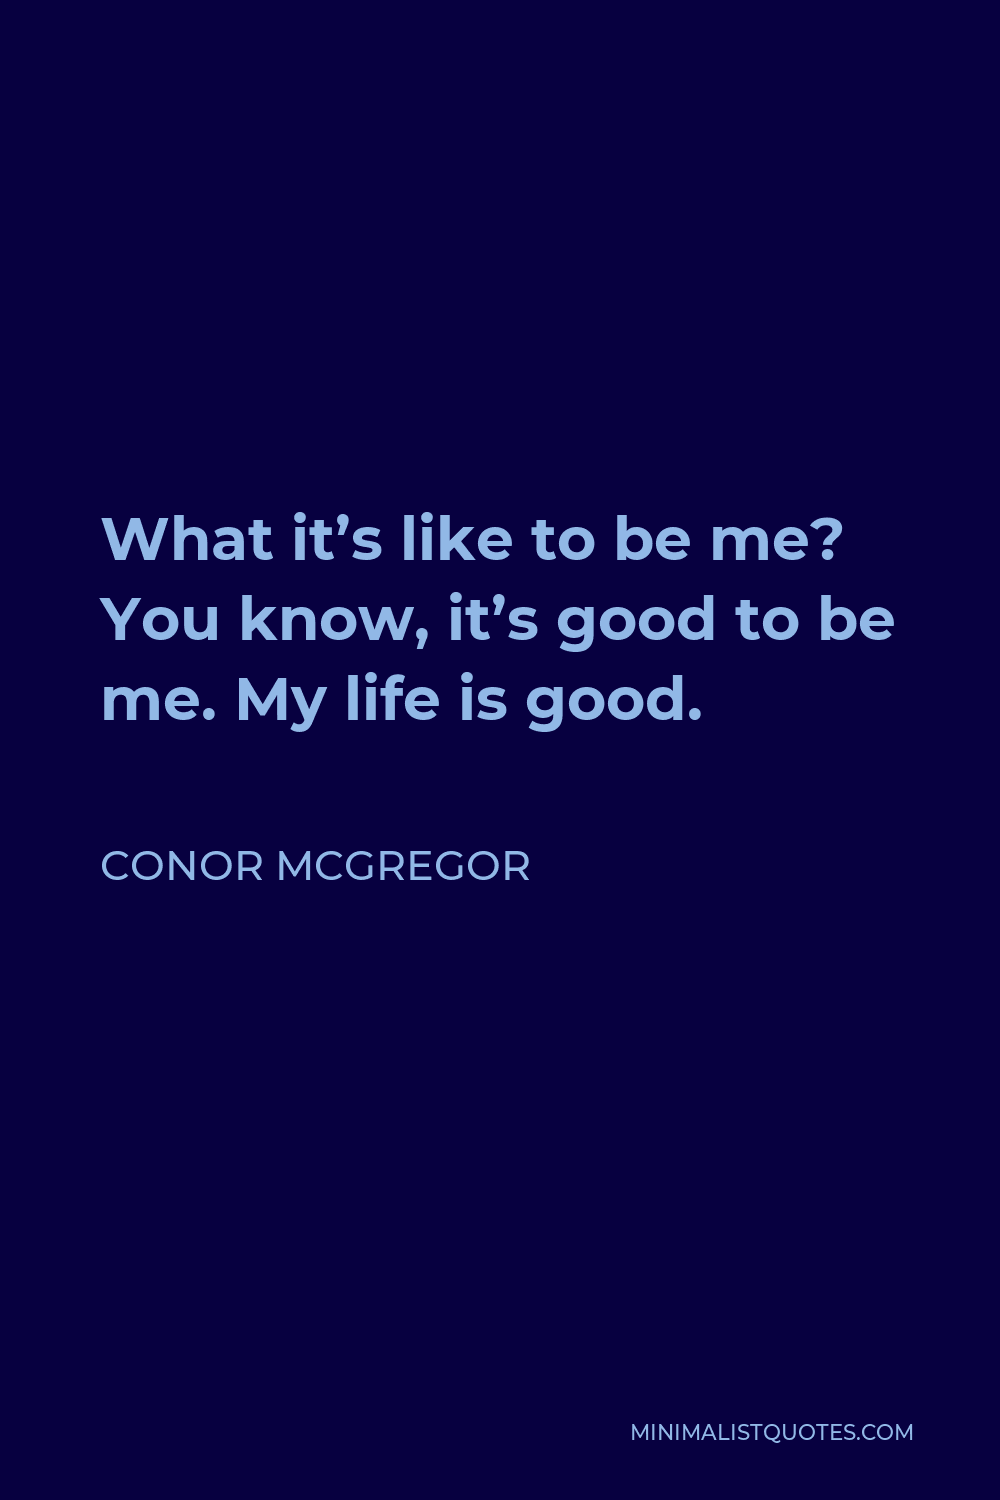 Conor McGregor Quote - What it’s like to be me? You know, it’s good to be me. My life is good.